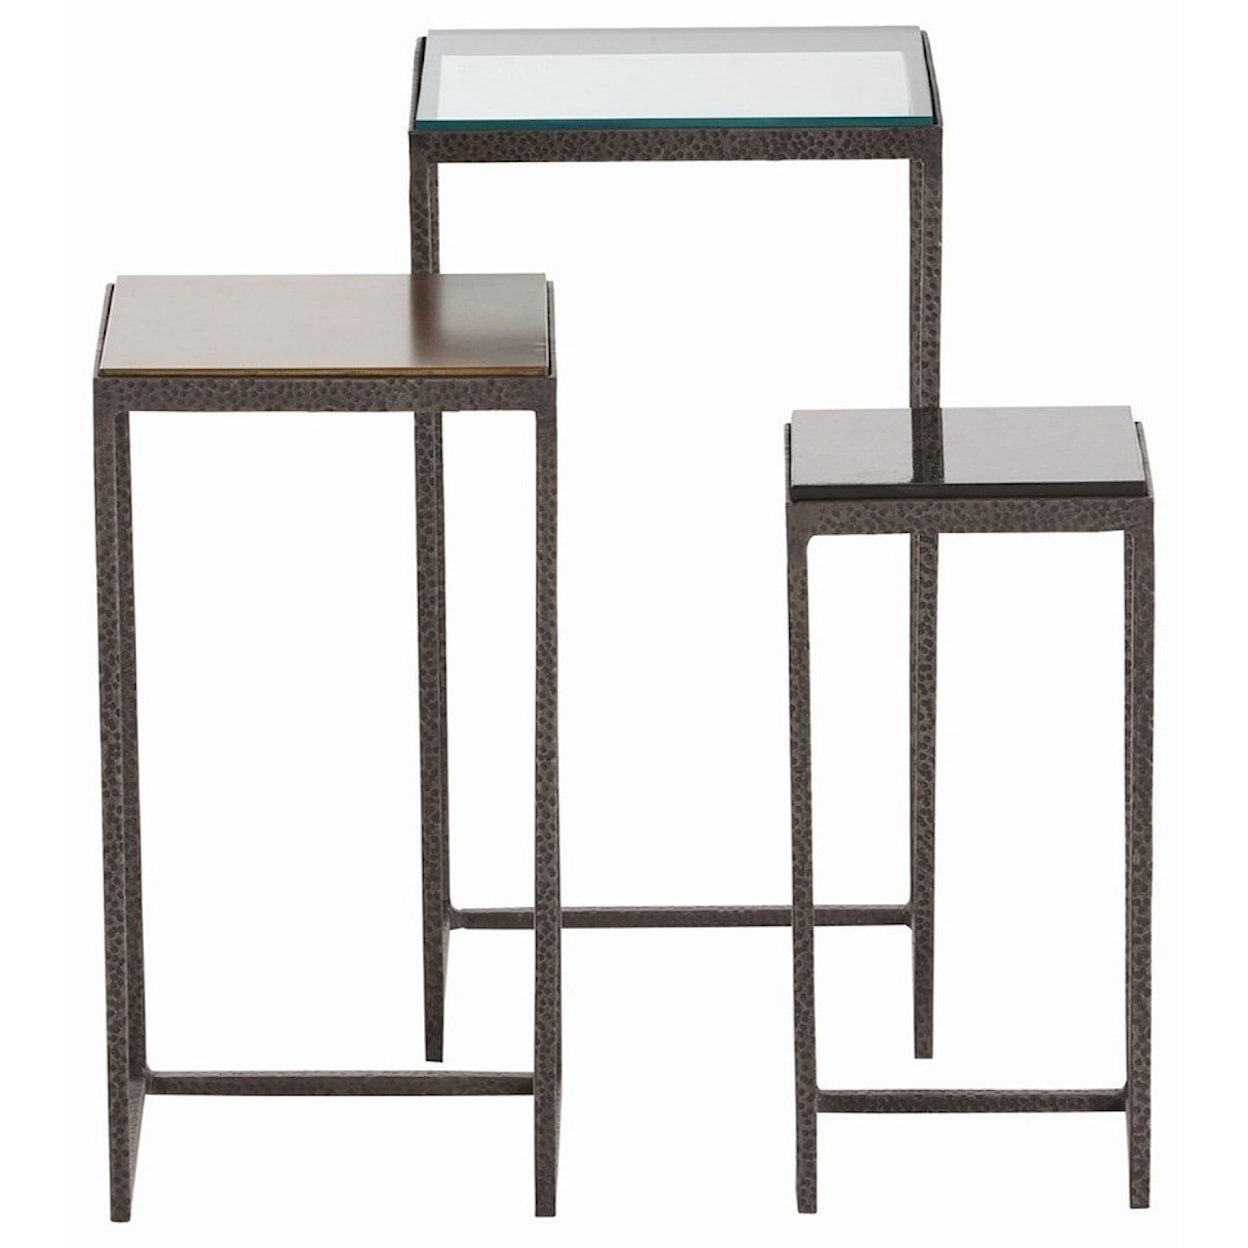 Arteriors Accent Tables Nesting Accent Tables